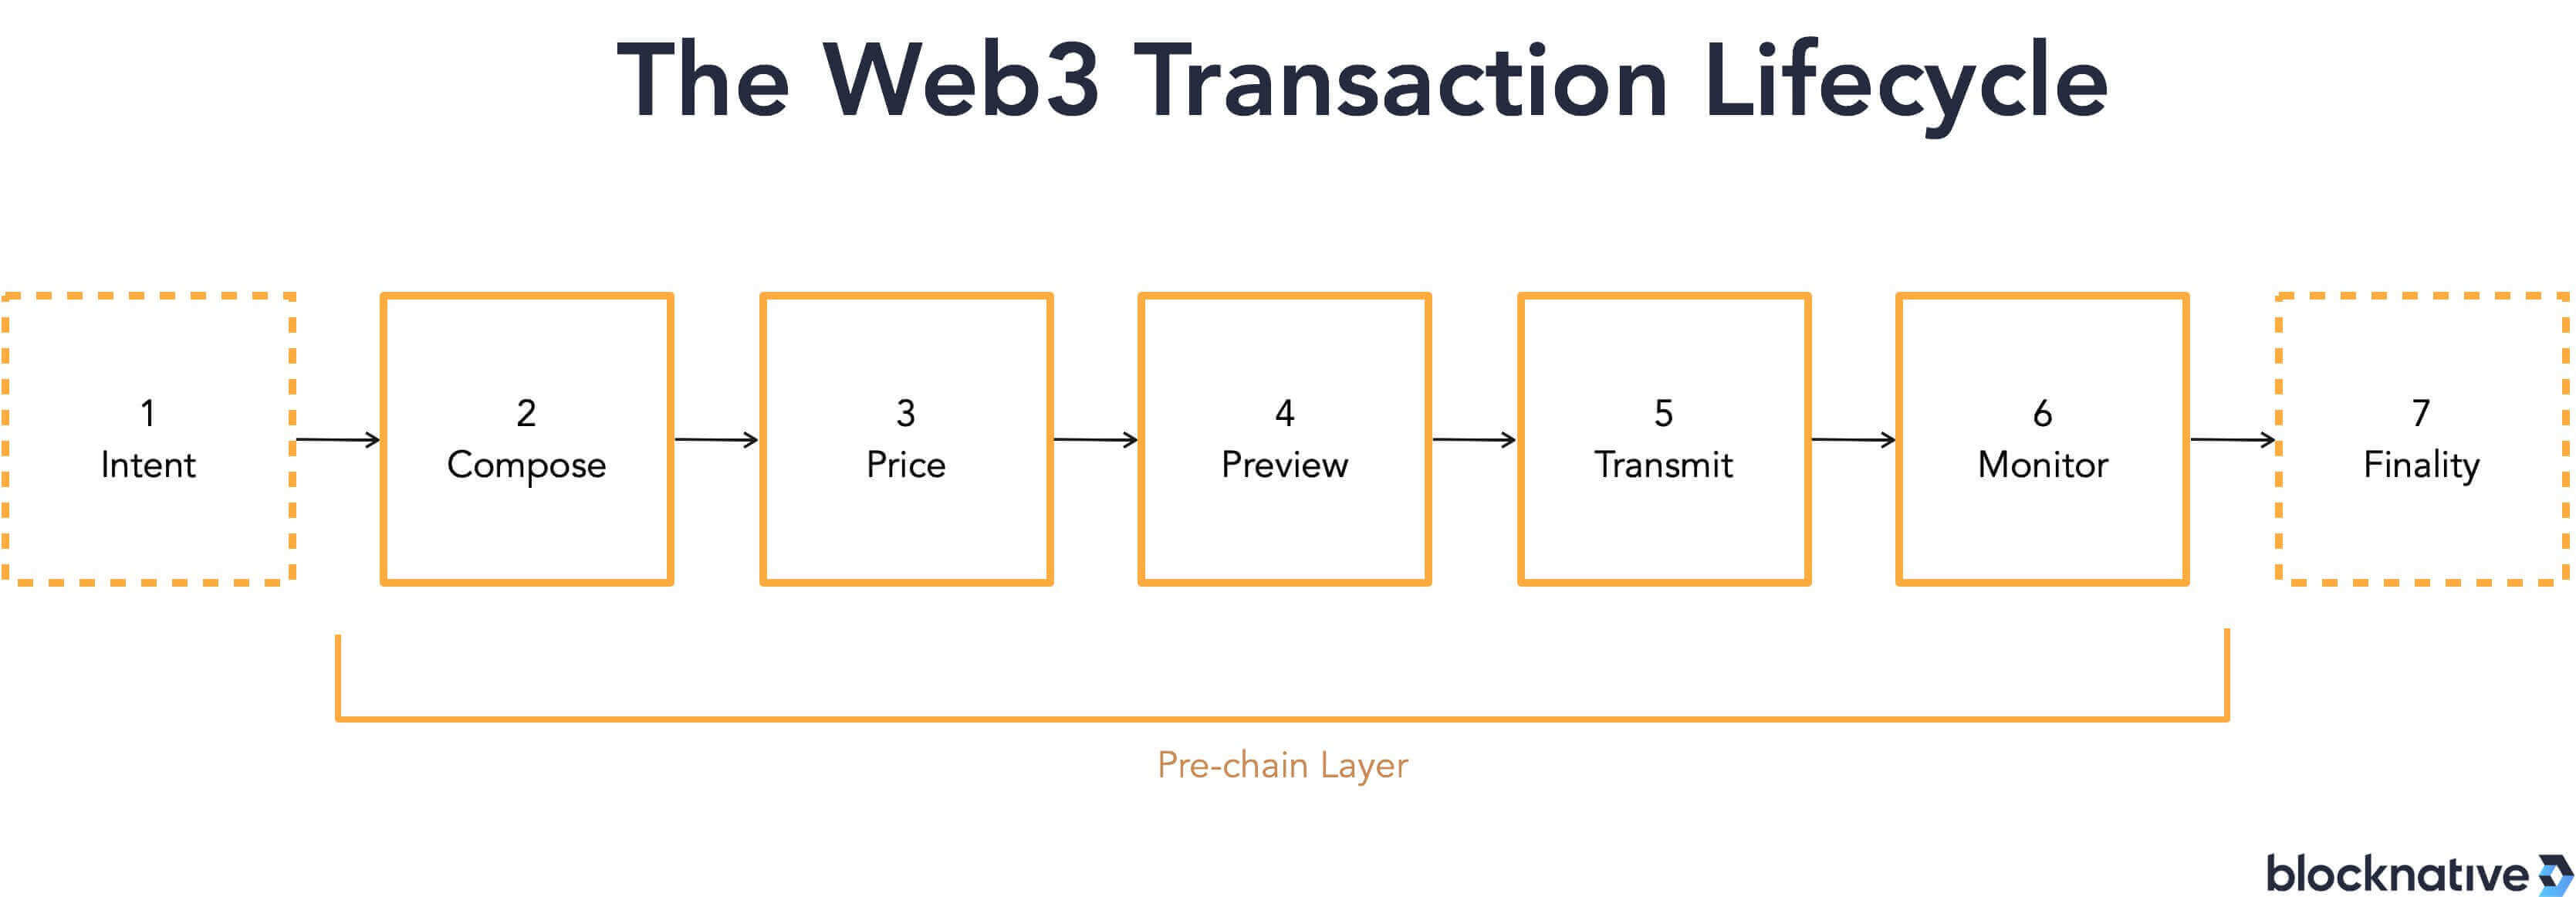 web3-transaction-lifecycle-simple